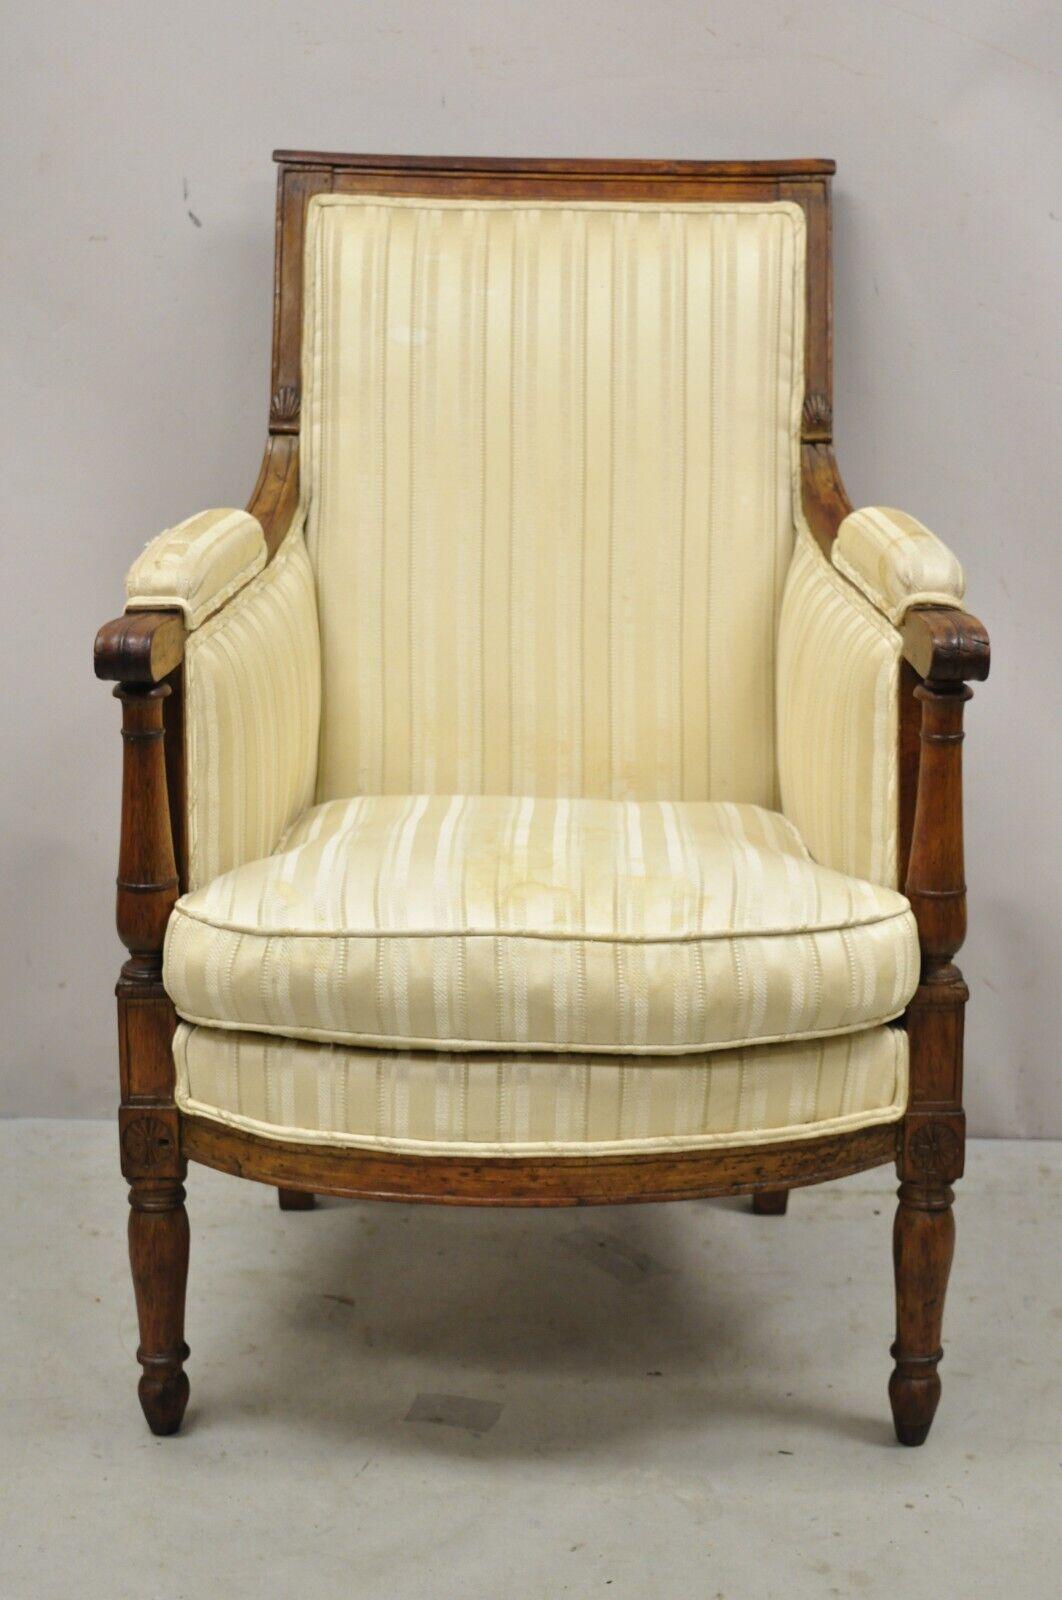 Antique 19th century French Louis XVI Neoclassical Style Walnut Bergere Club Lounge armchair. Item features a wonderful antique joinery and construction, desirable patina, solid wood frame, distressed finish, nicely carved details, tapered legs,